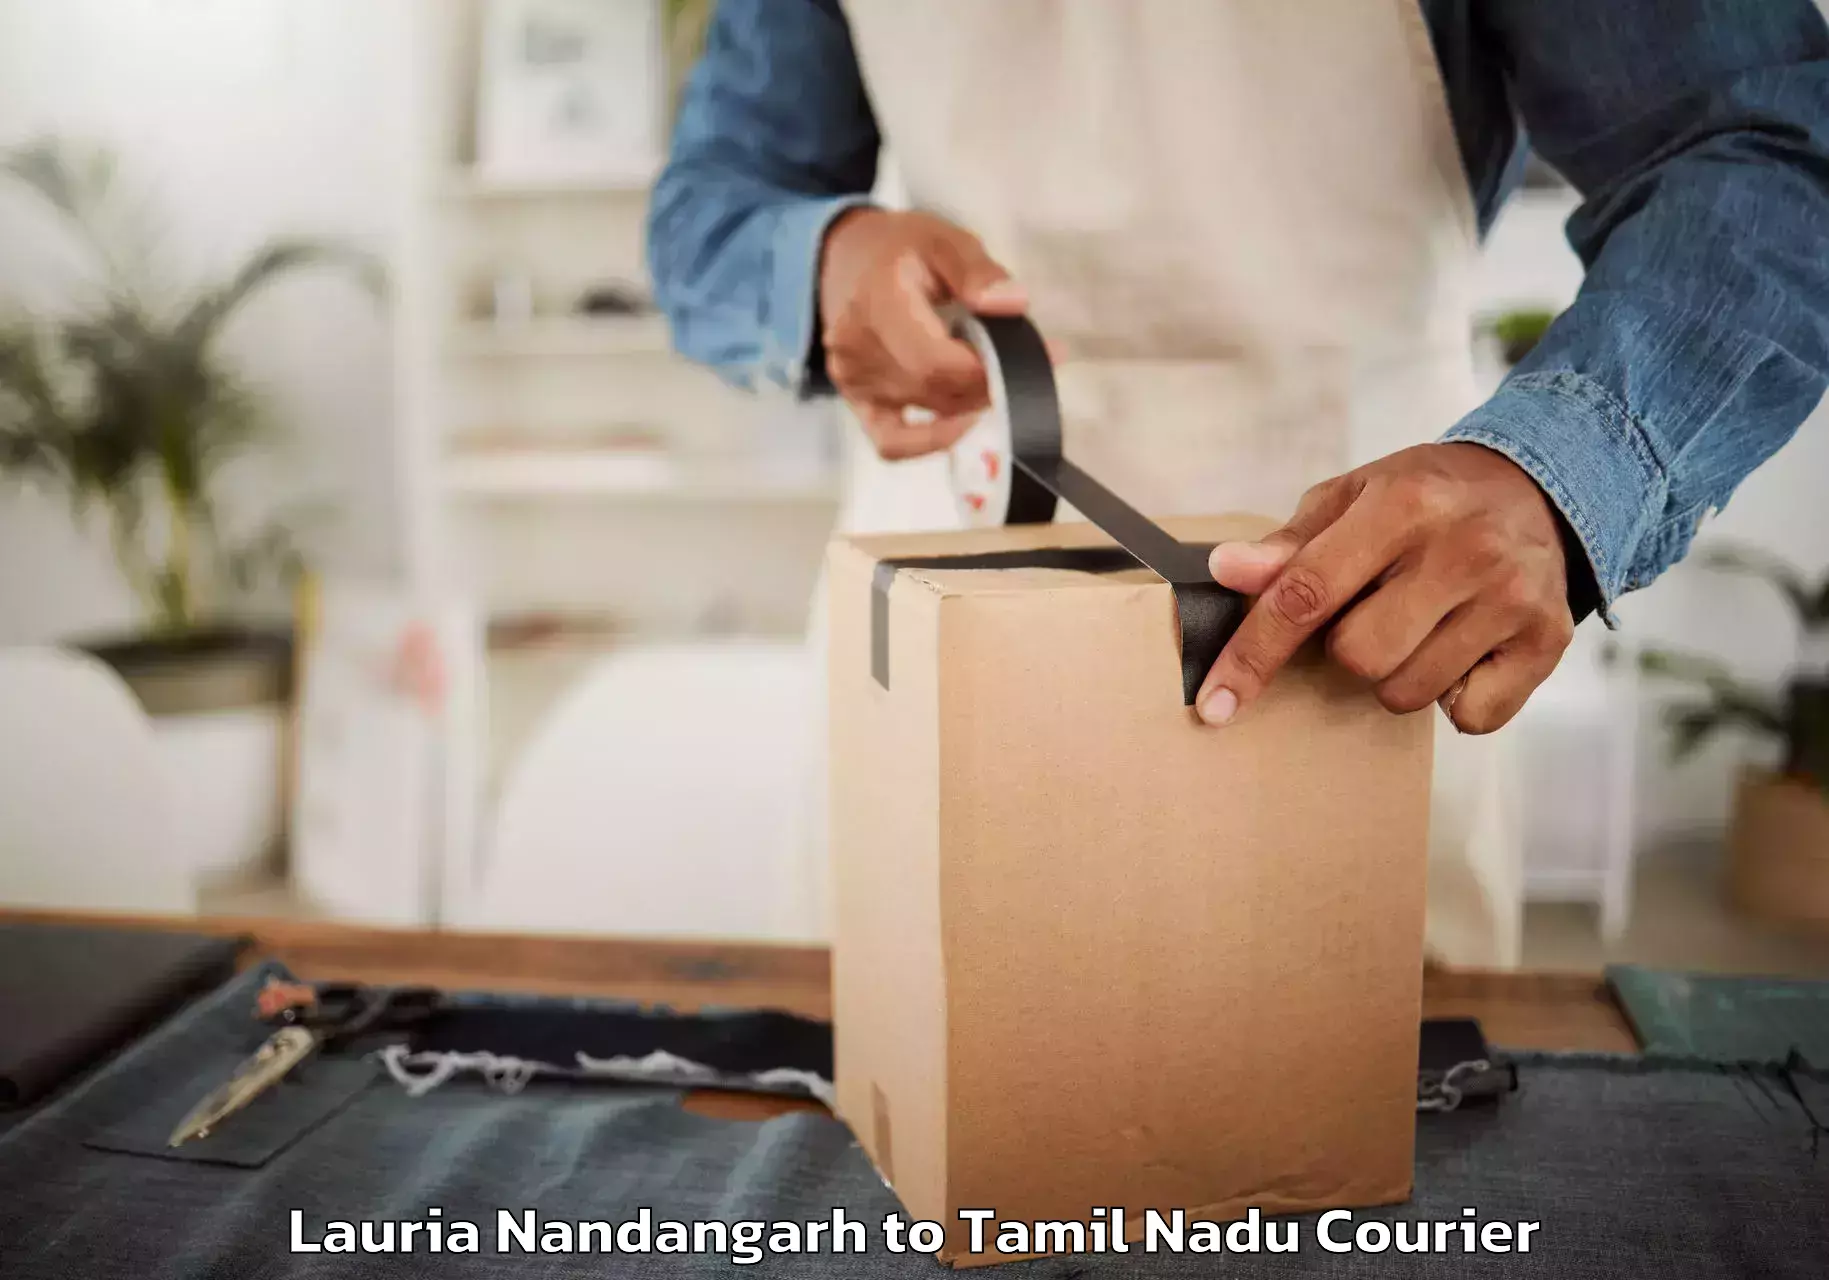 Hassle-free relocation Lauria Nandangarh to Dindigul